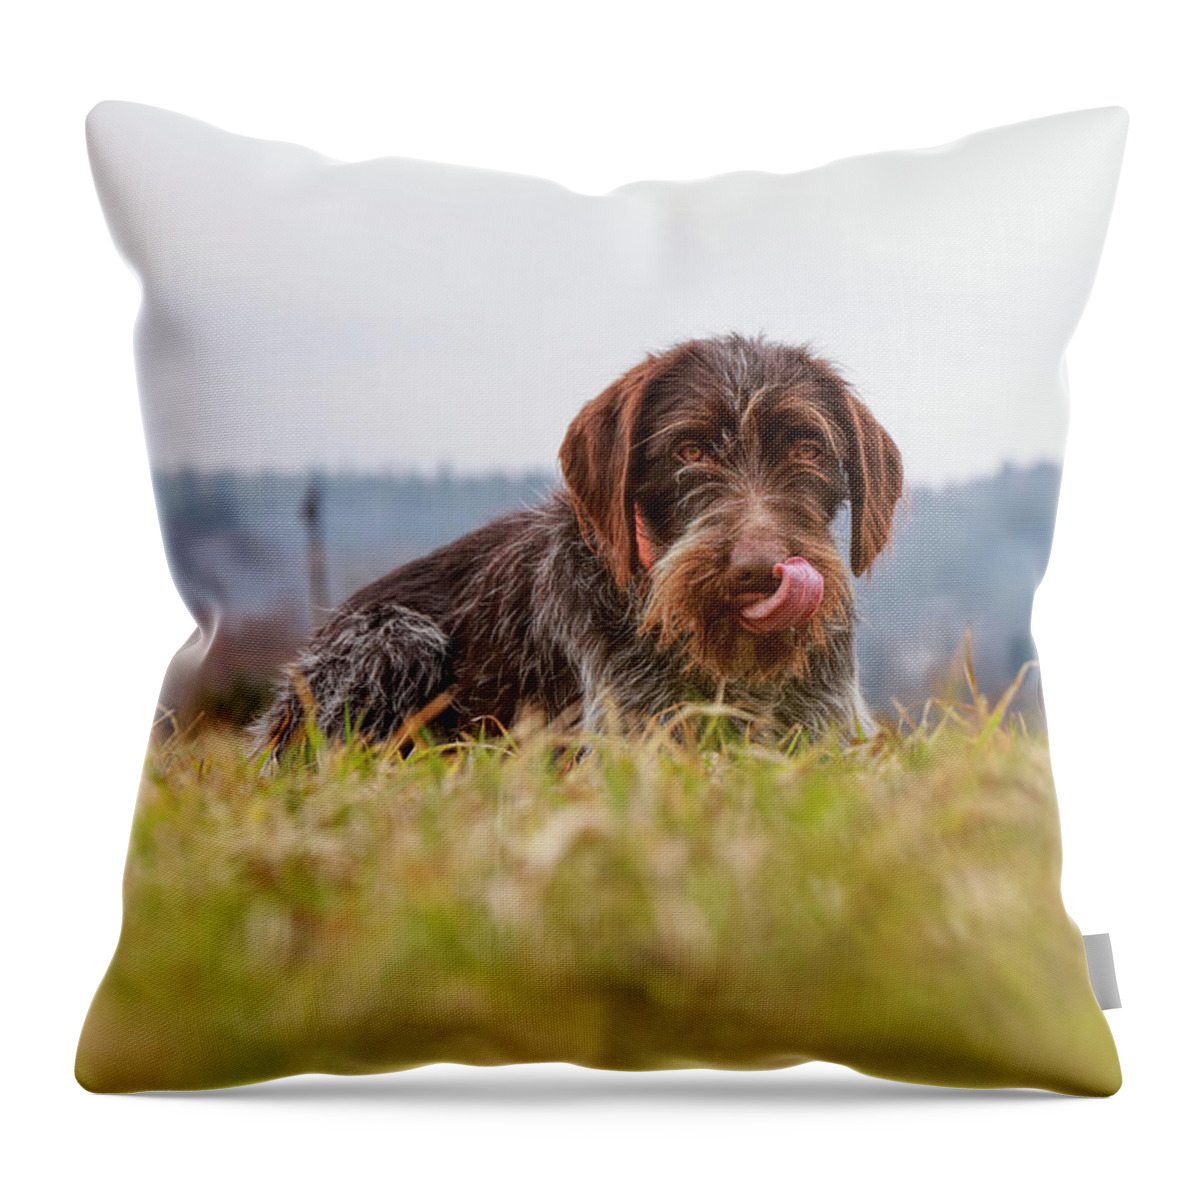 Bohemian Wire Throw Pillow featuring the photograph Female dog is laughing his head off. Bohemian wire dog is scratching her muzzle. Itchiness is evil. by Vaclav Sonnek